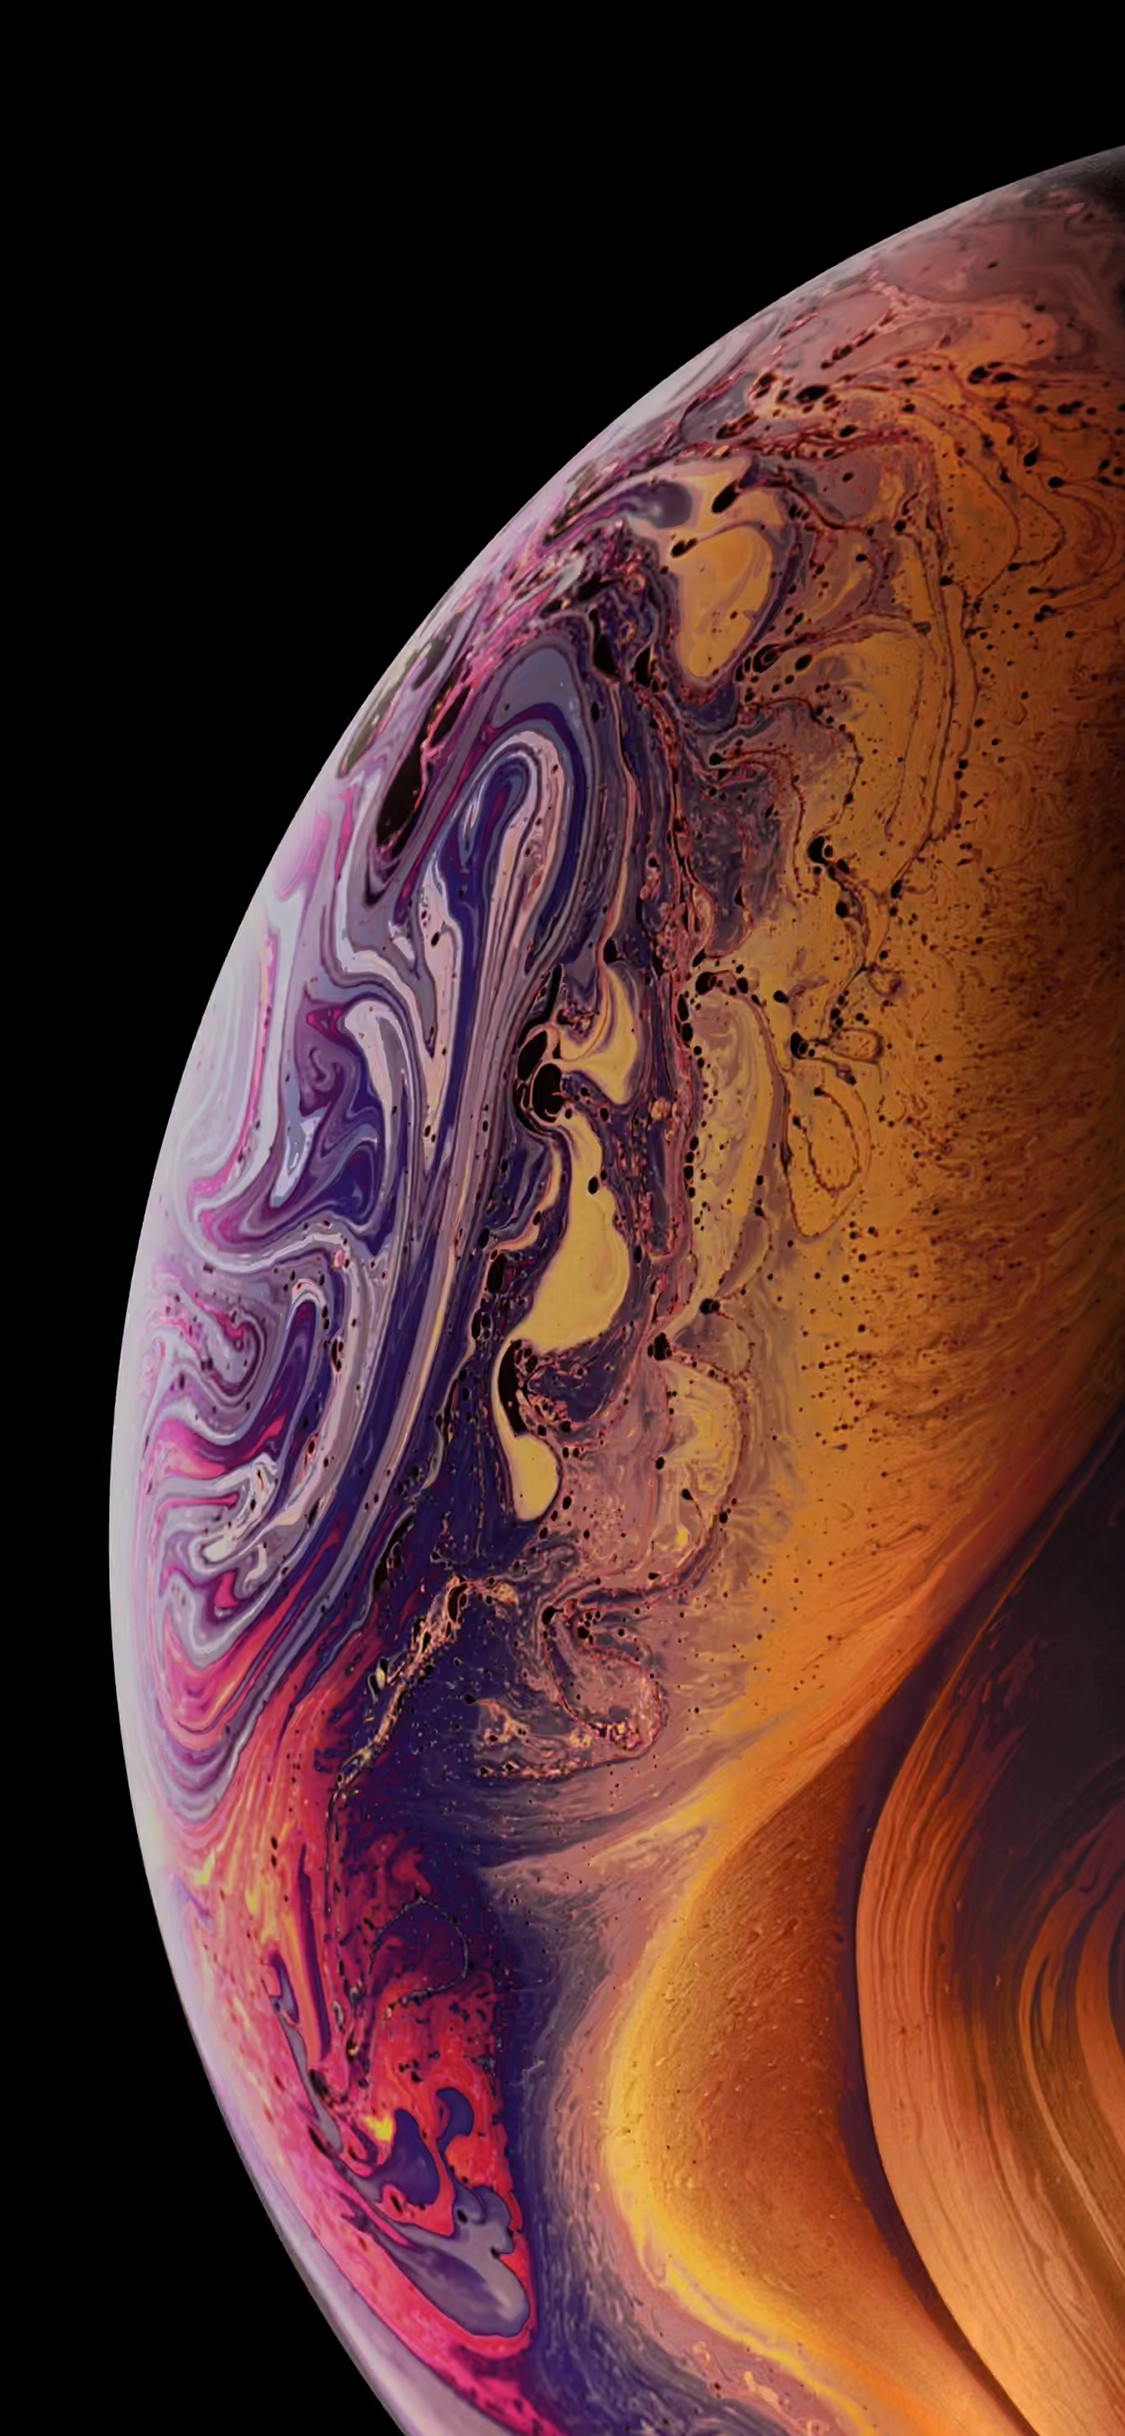 iPhone XS Backgrounds With high-resolution 1125X2436 pixel. You can set as wallpaper for Apple iPhone X, XS Max, XR, 8, 7, 6, SE, iPad. Enjoy and share your favorite HD wallpapers and background images